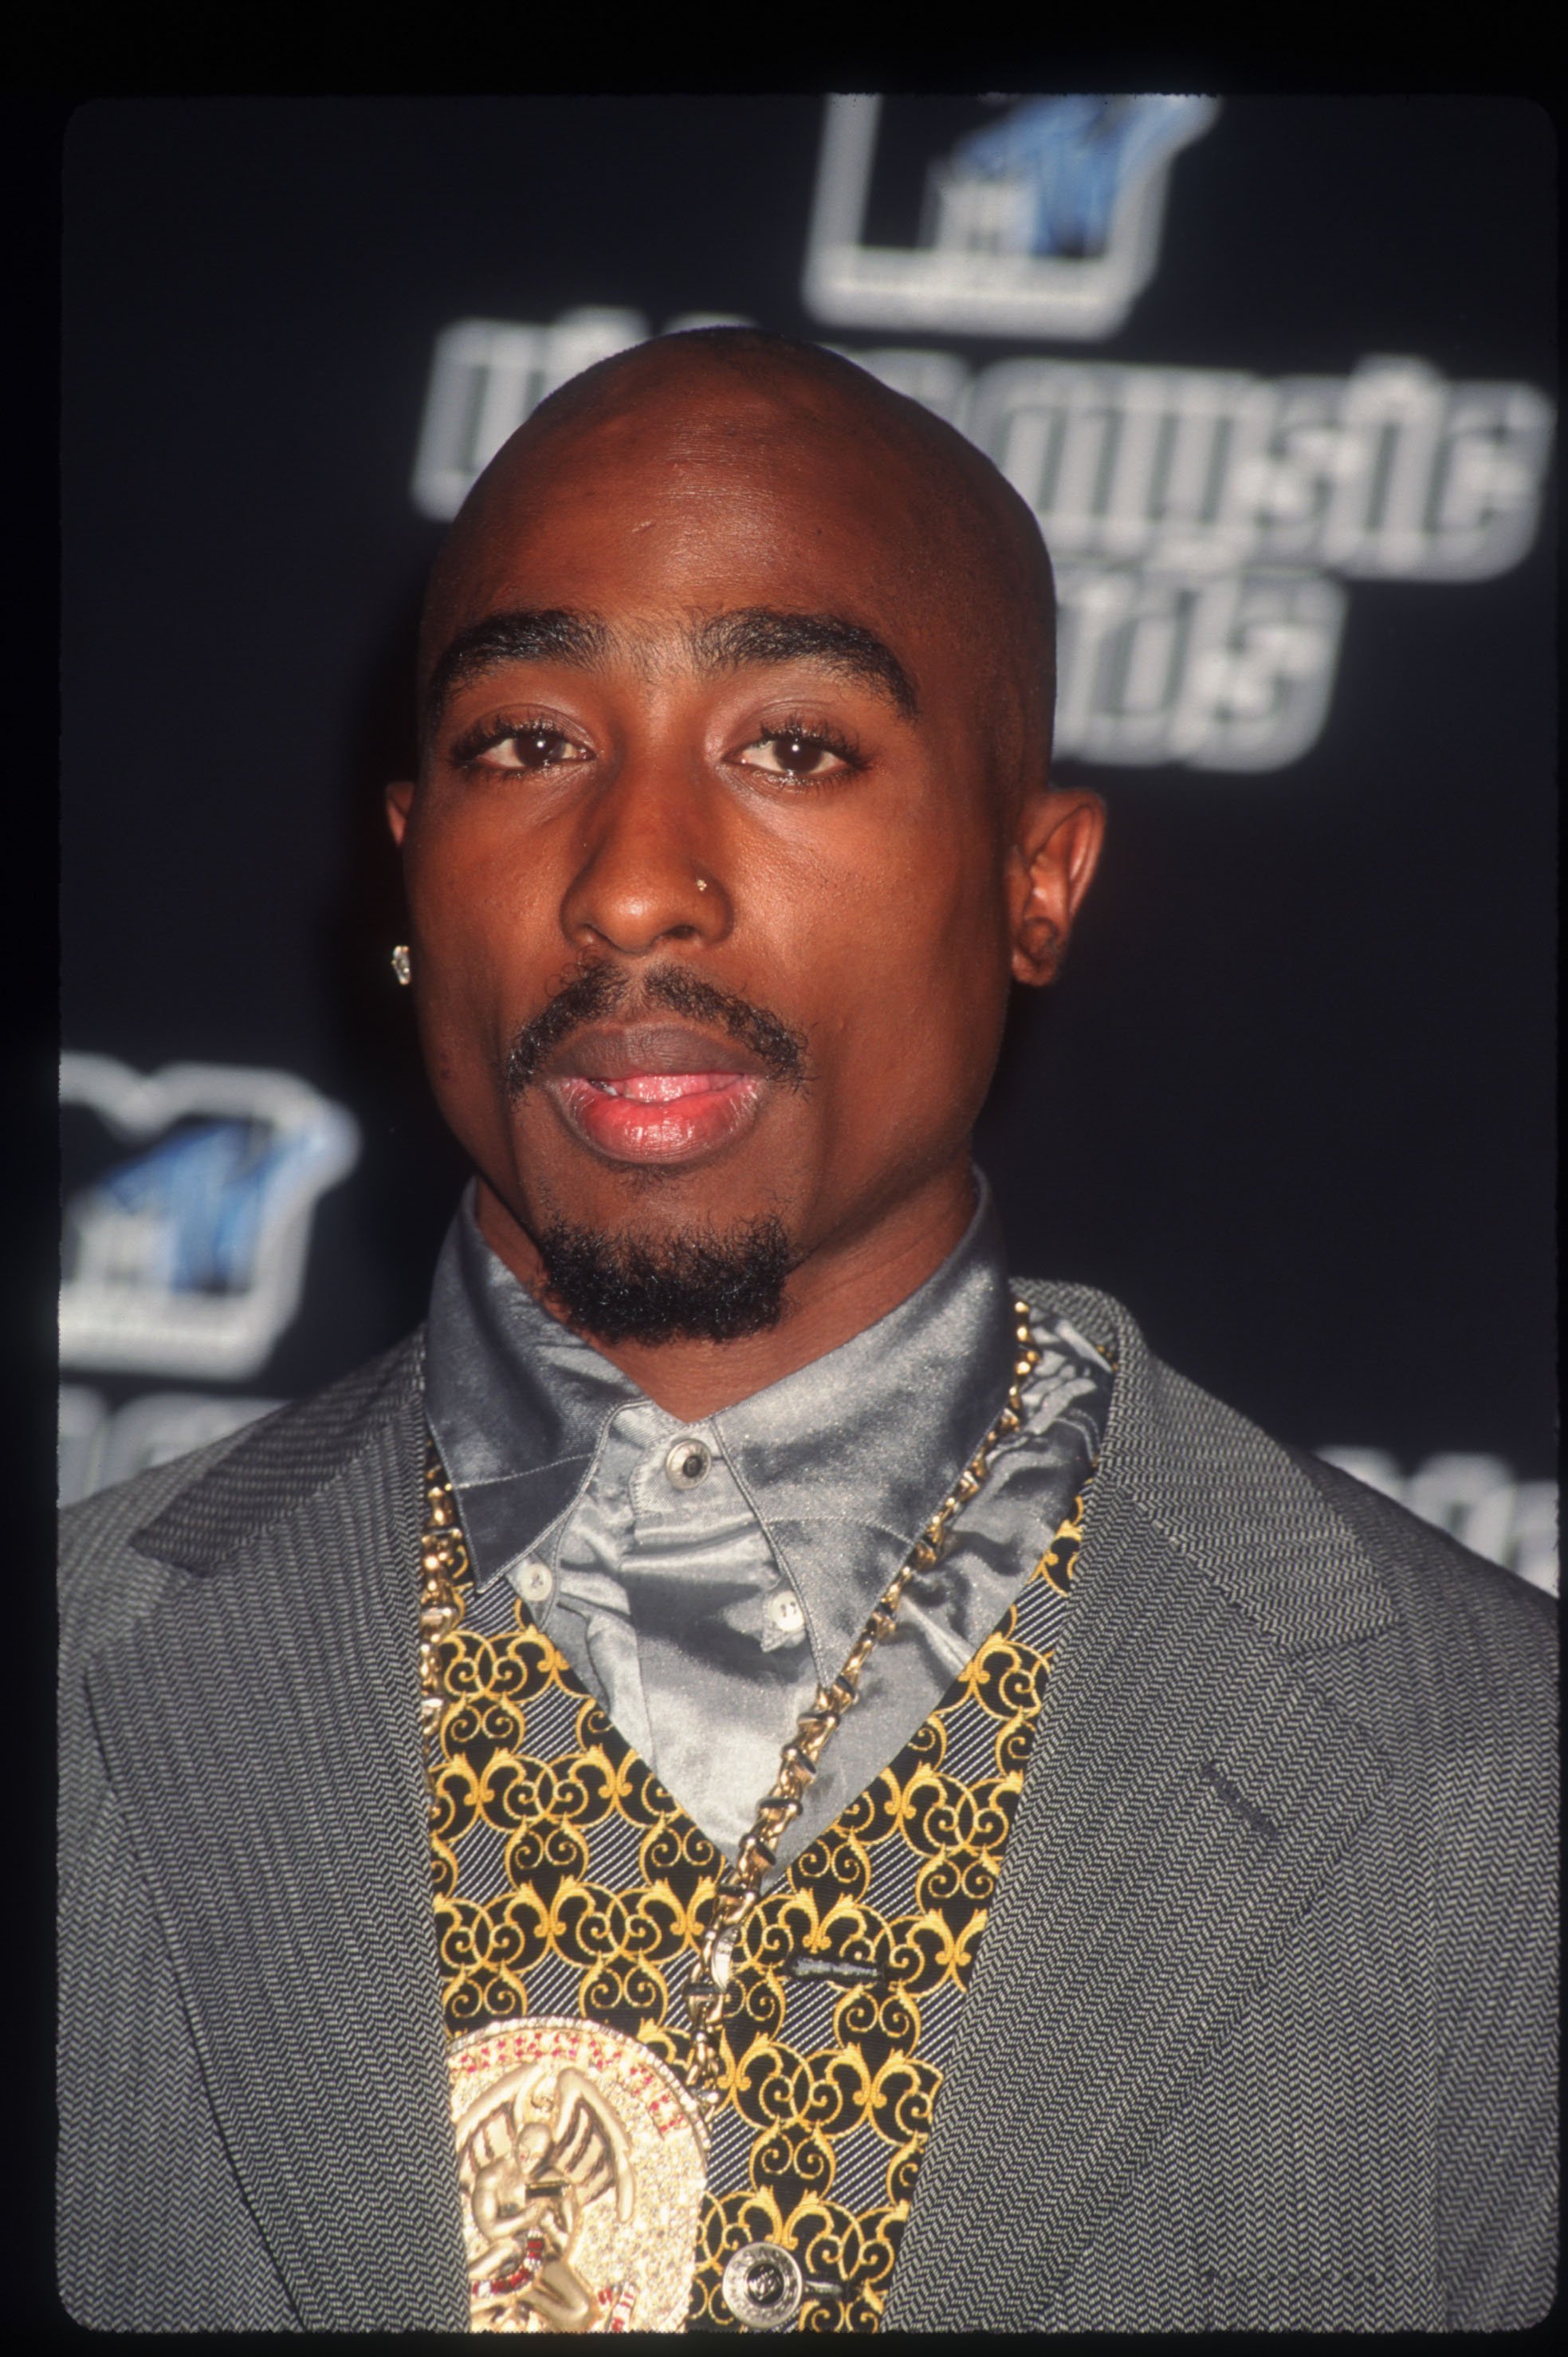 Tupac Shakur poses backstage at the MTV Video Music Awards on September 4, 1996 in New York City | Photo: Getty Images